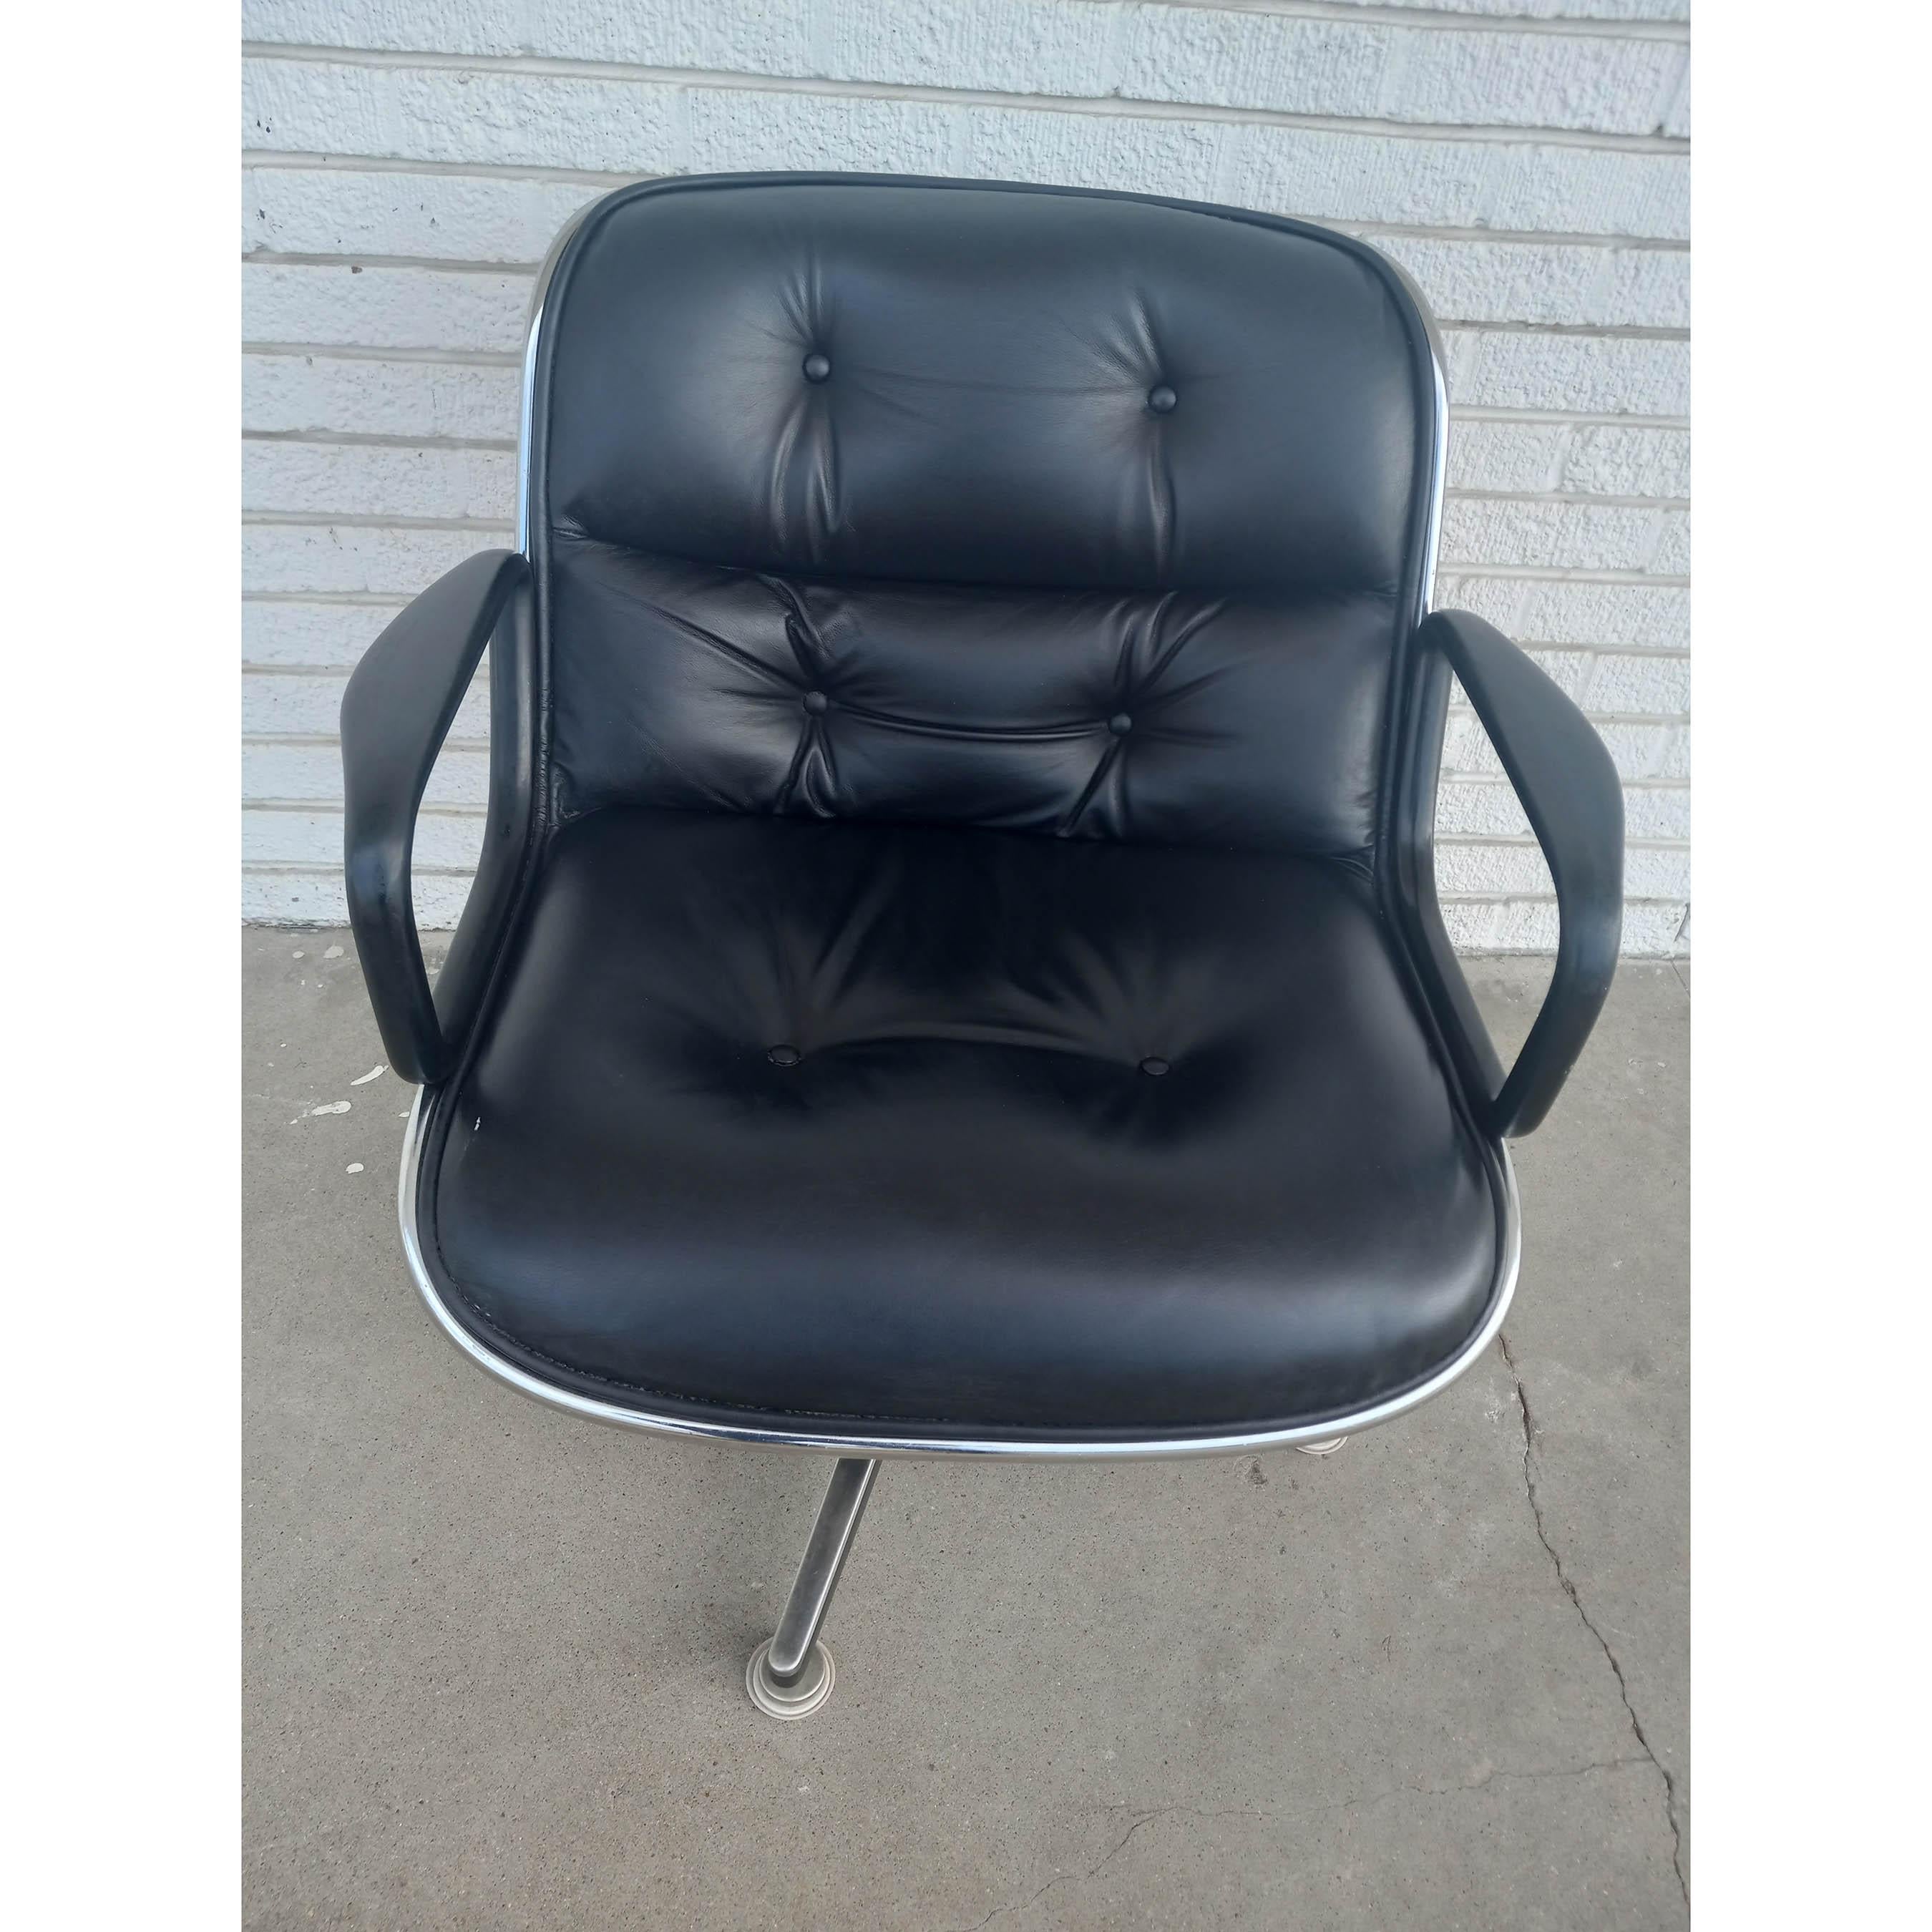 Knoll Pollock Executive Swivel armchair black leather
1956 Design 
Charles Pollock’s 1965 executive chair, now considered one of Knoll’s most memorable designs, features a chrome rim that supports the chair both structurally and visually